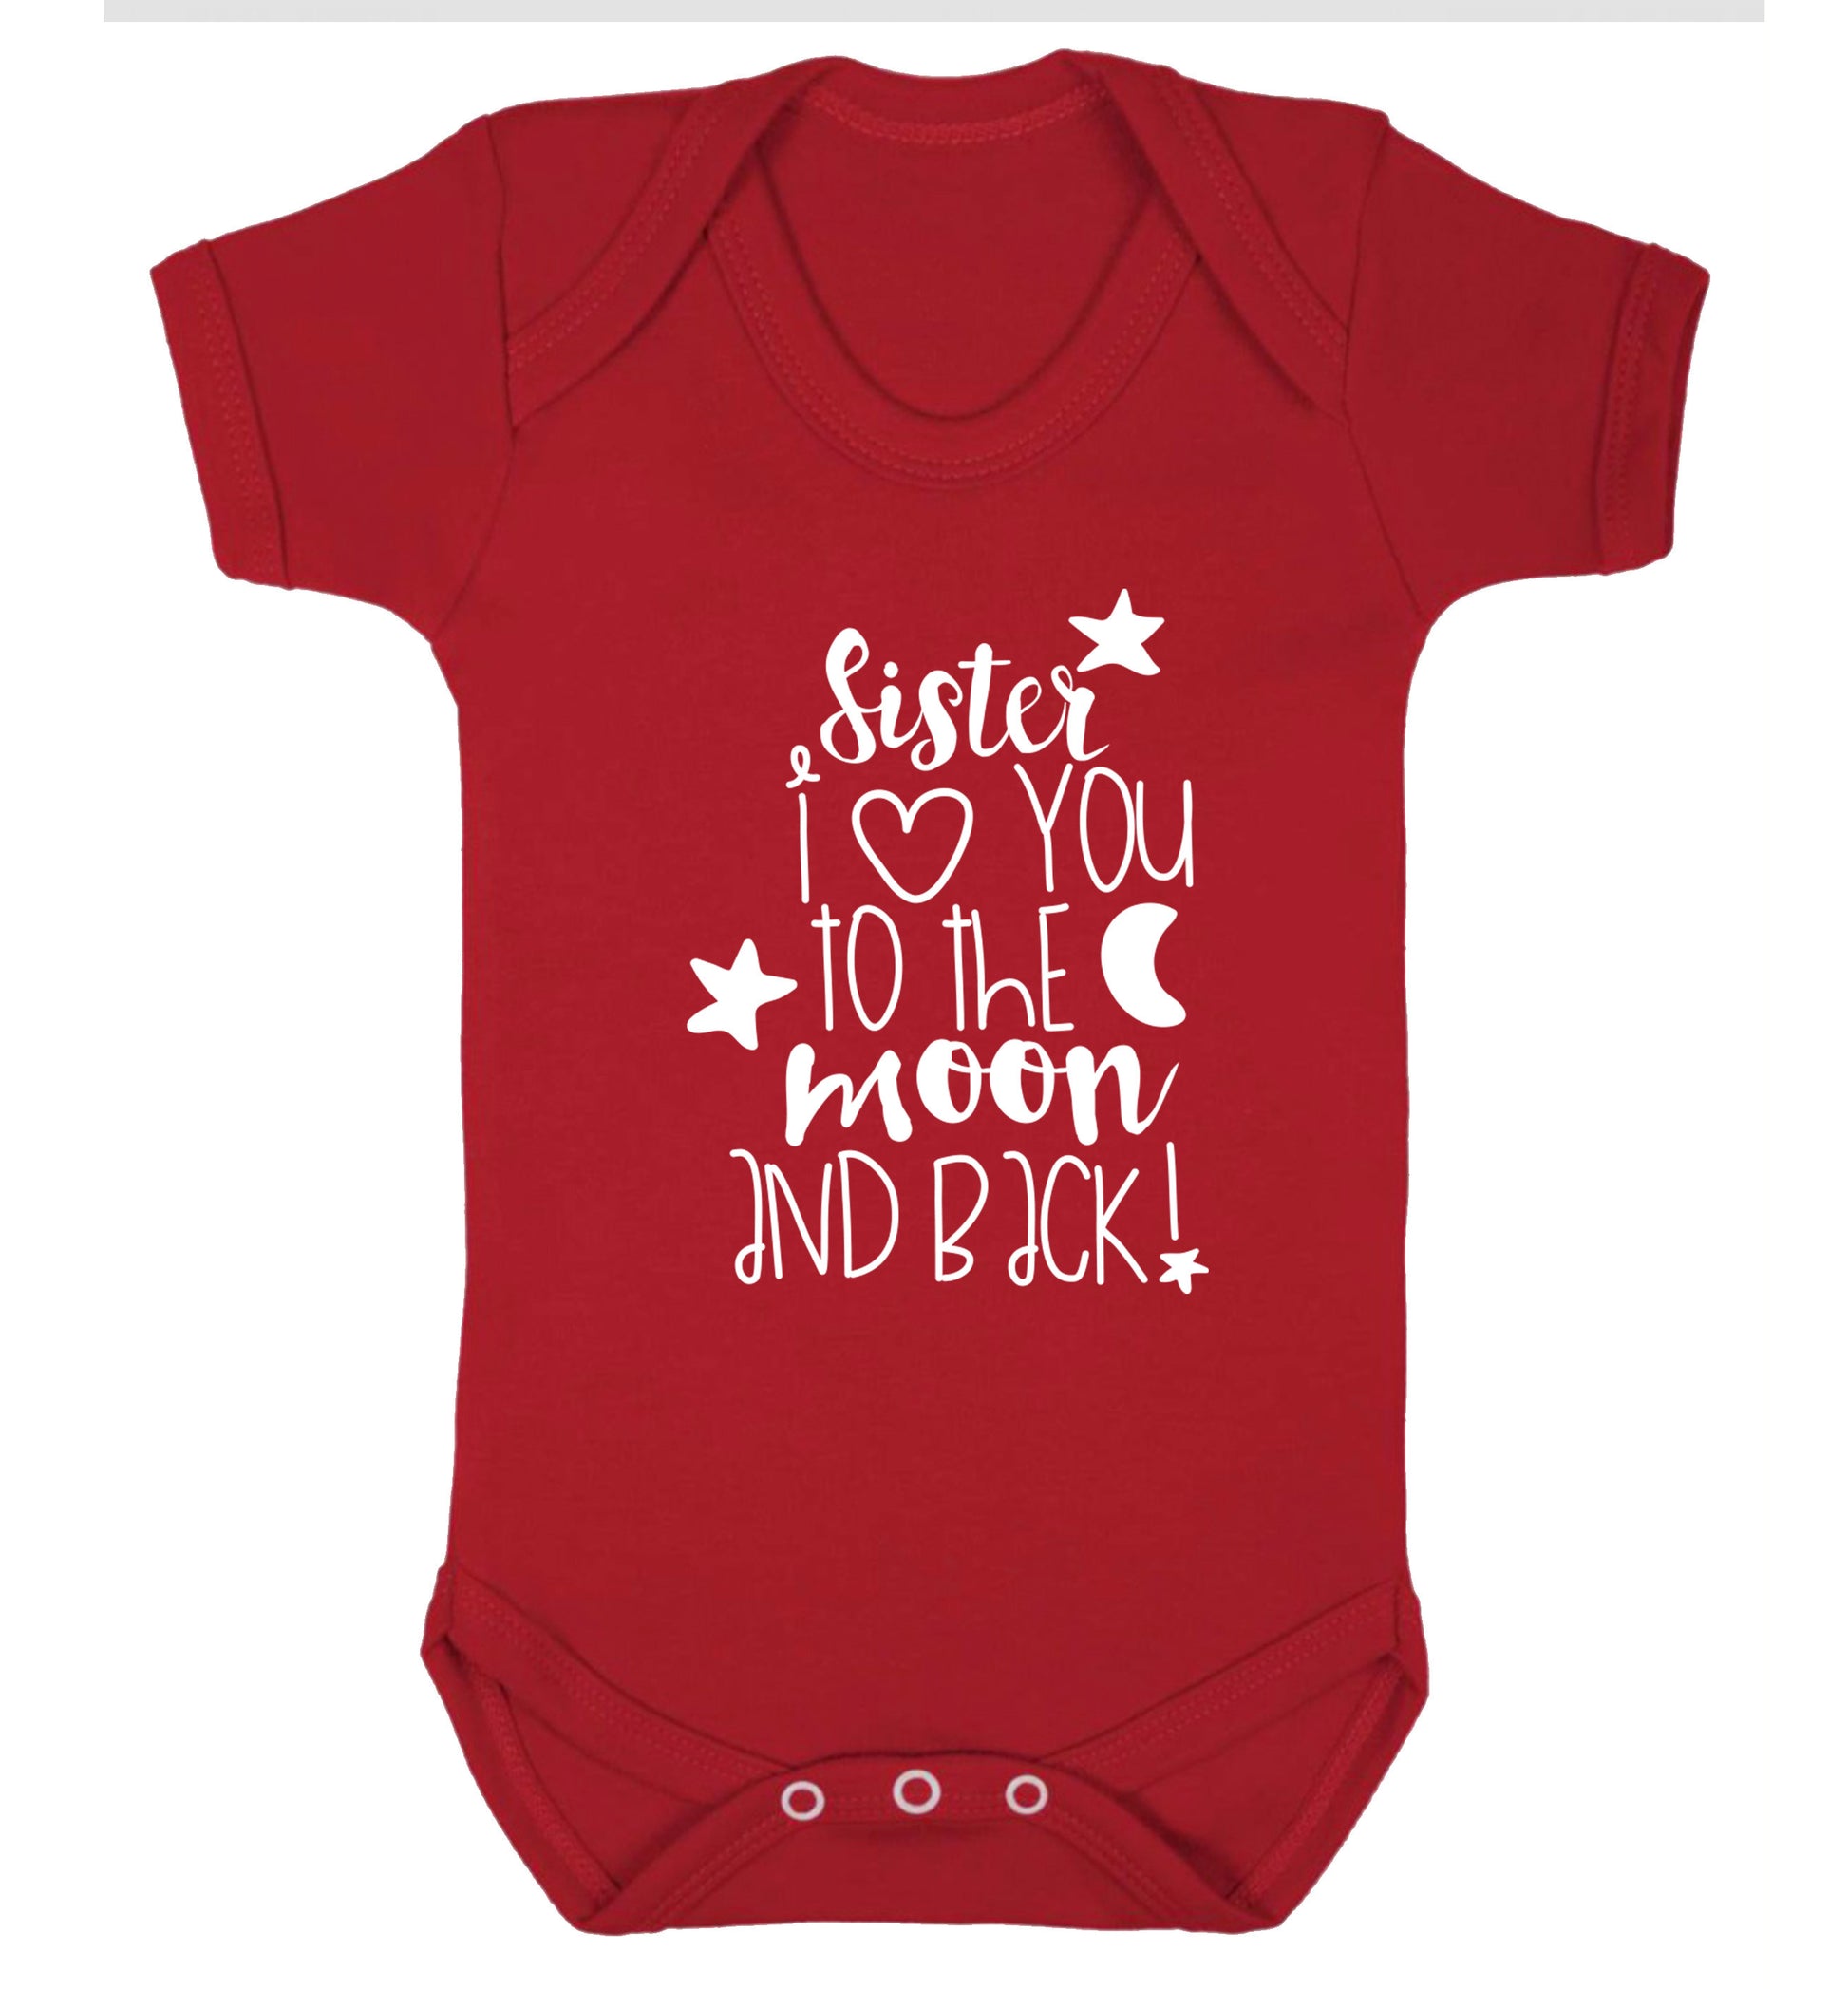 Sister I love you to the moon and back Baby Vest red 18-24 months